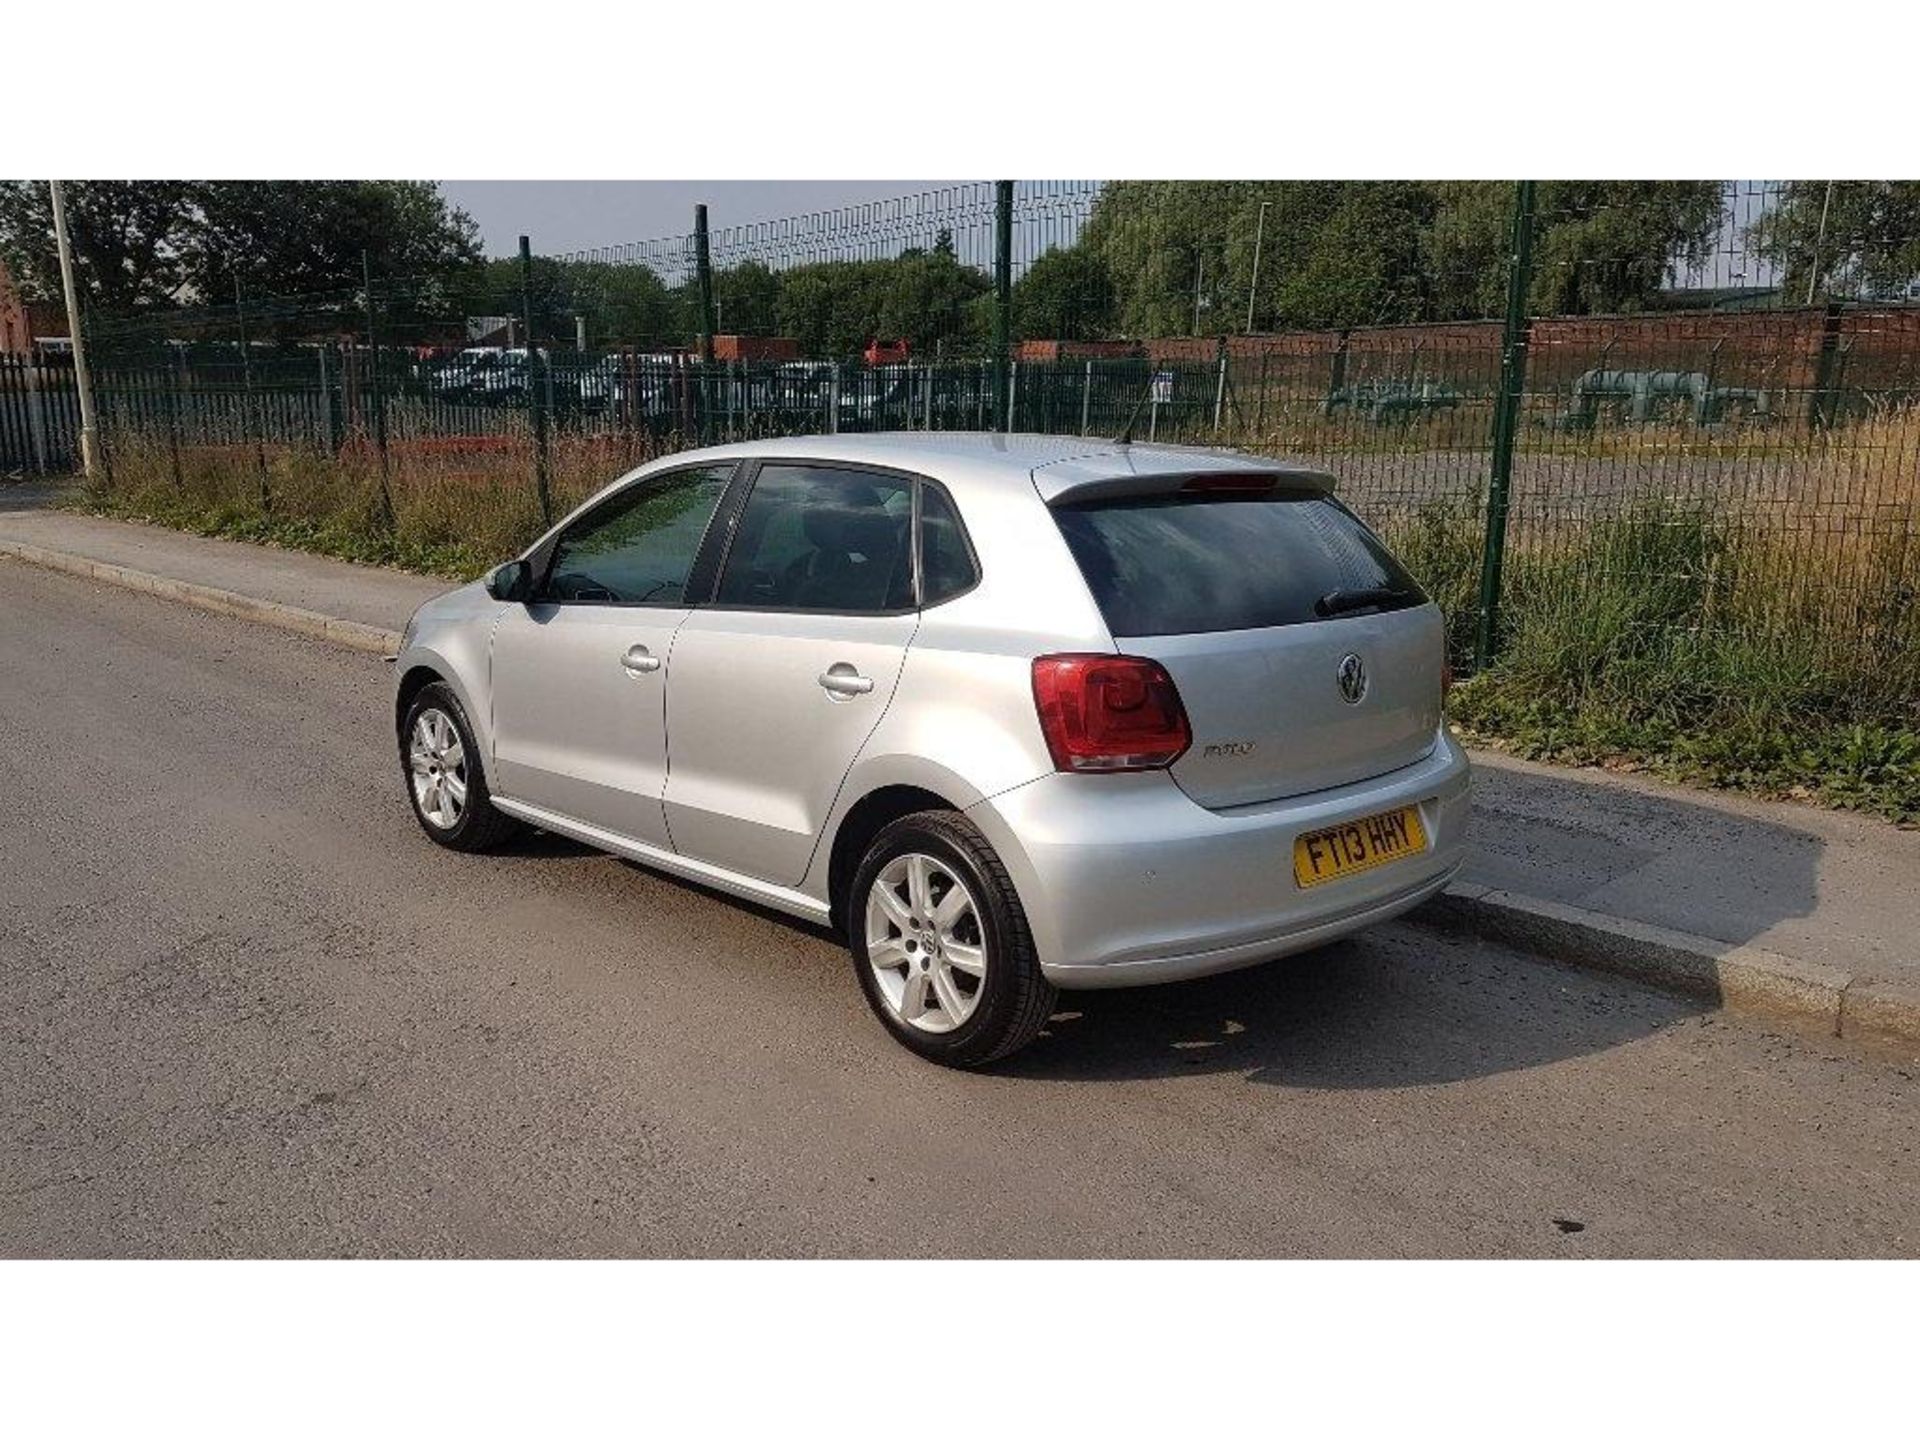 VOLKSWAGEN POLO 1.2 MATCH EDITION 5DR, FT13 HHY, 20.05.2013, PETROL, MILEAGE 28,499, MANUAL, 1.2L, 2 - Image 6 of 19